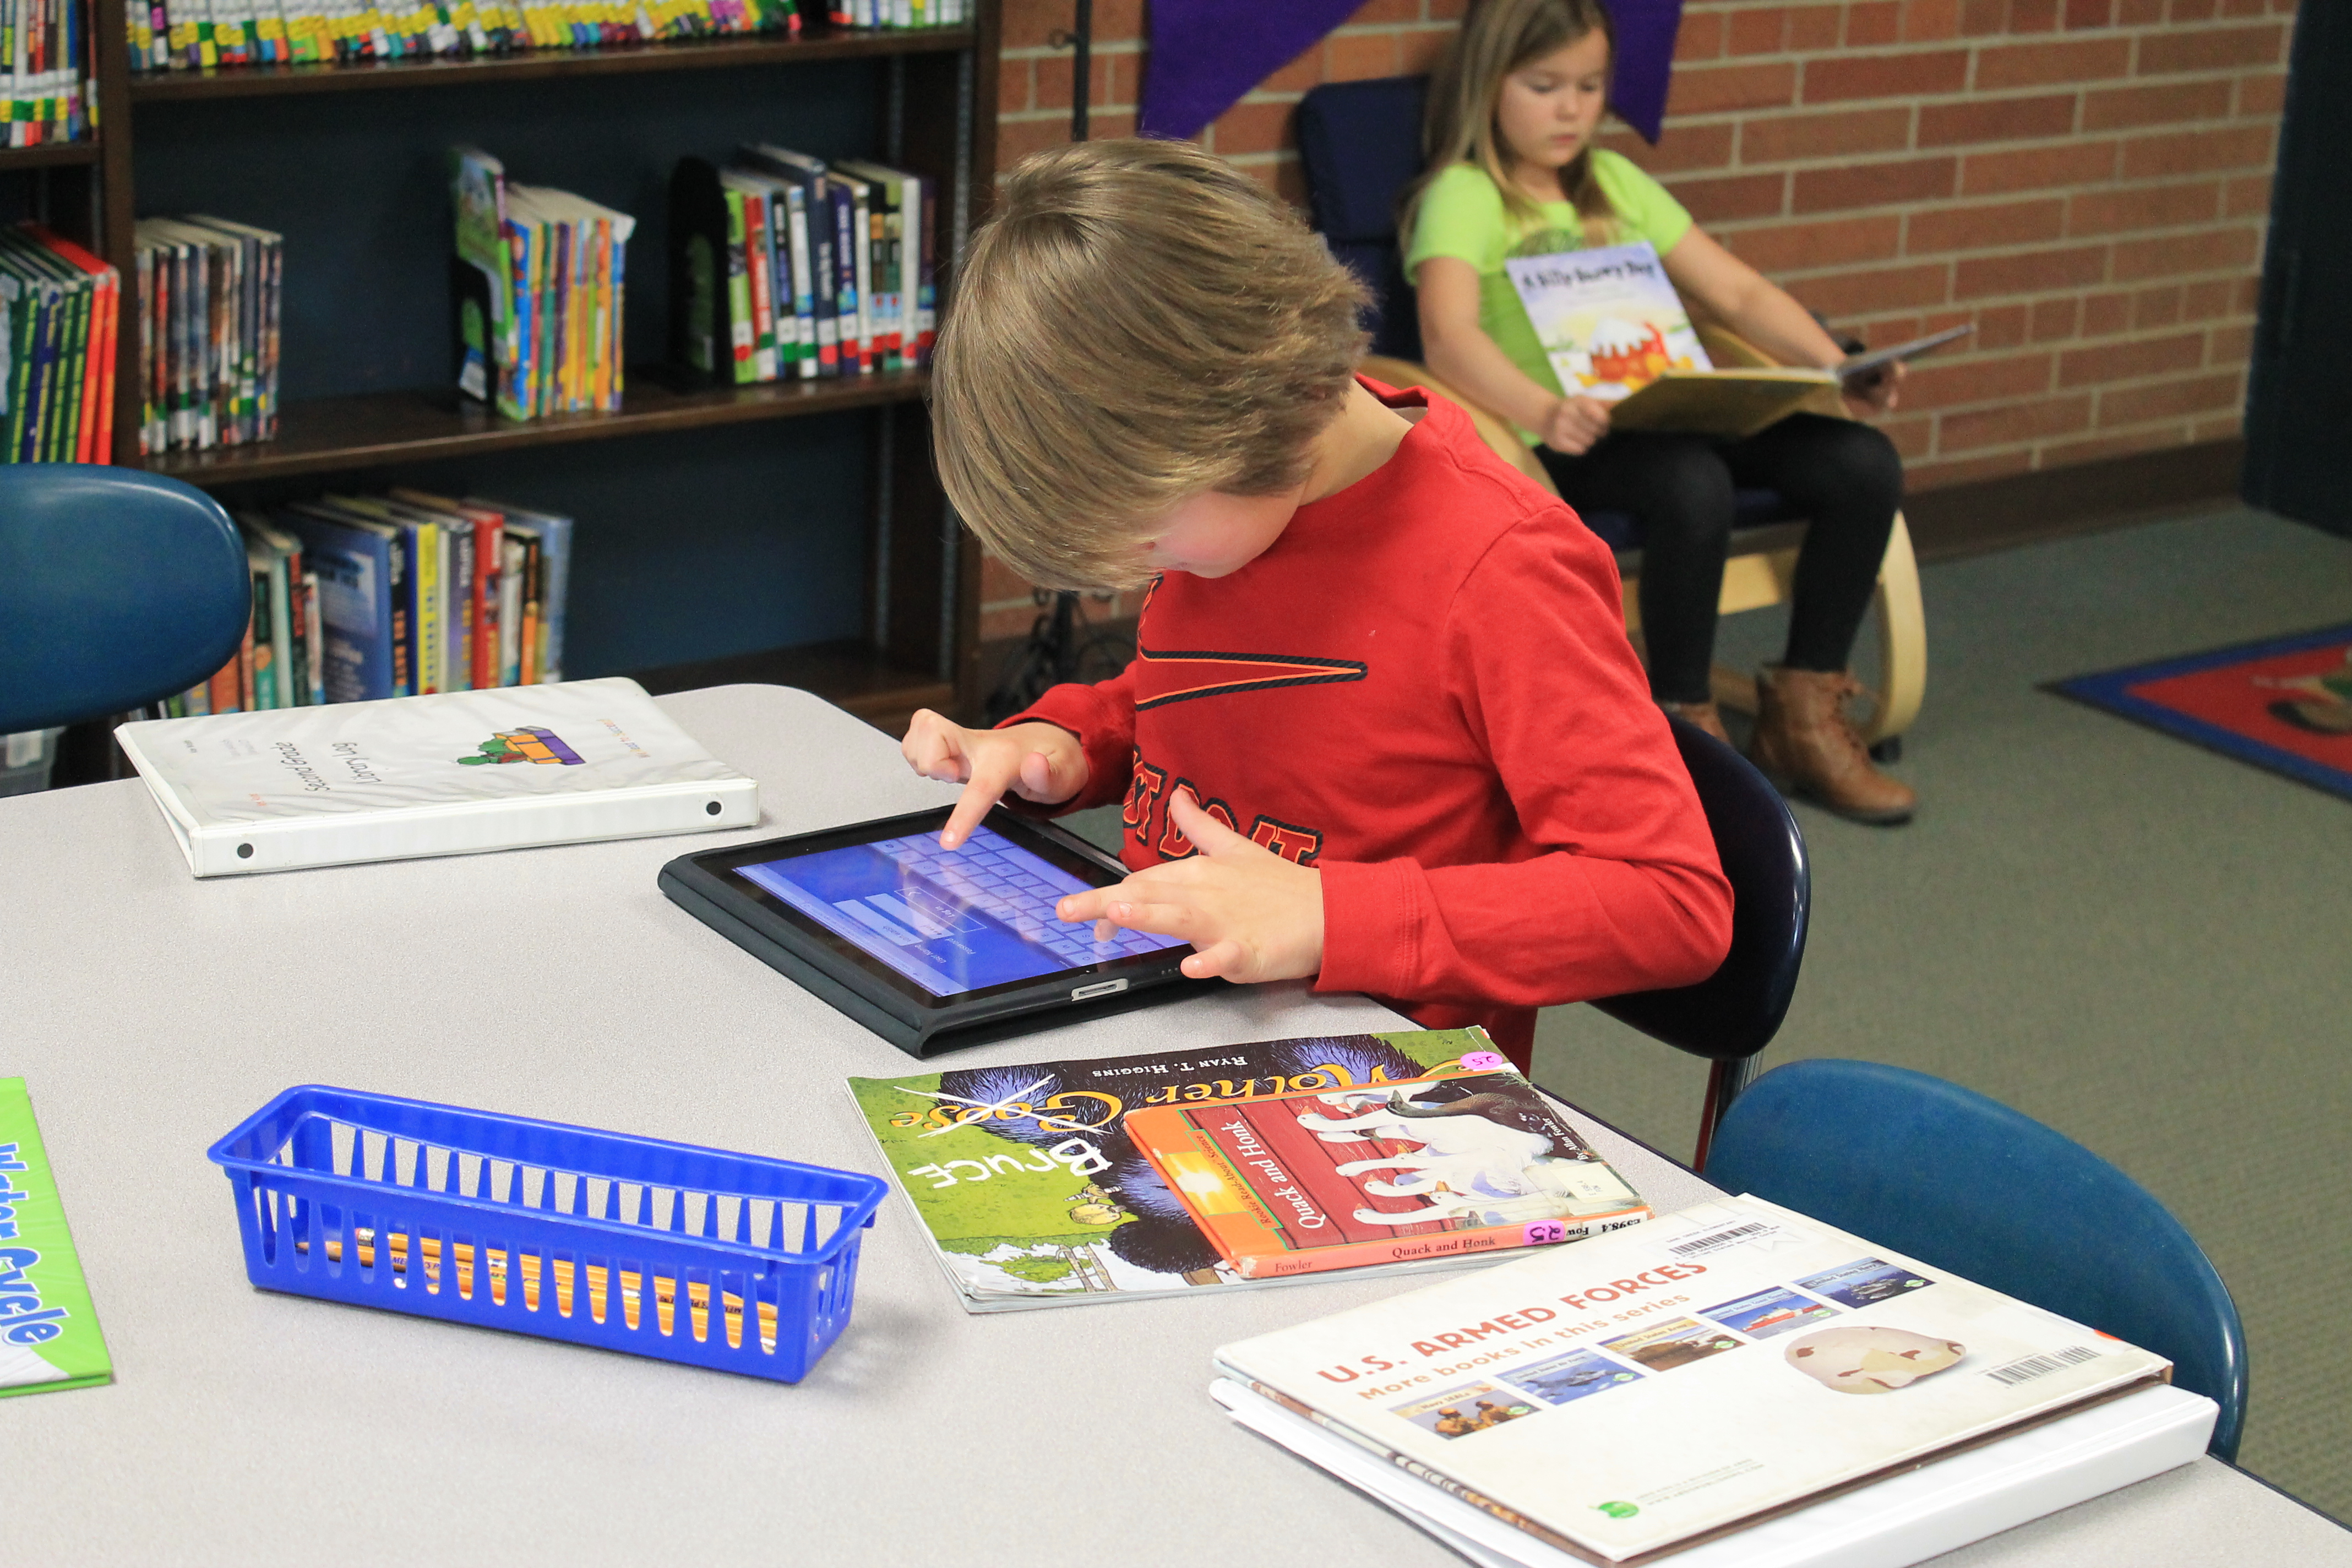 A small boy playing with an educational I-Pad in the library's school.